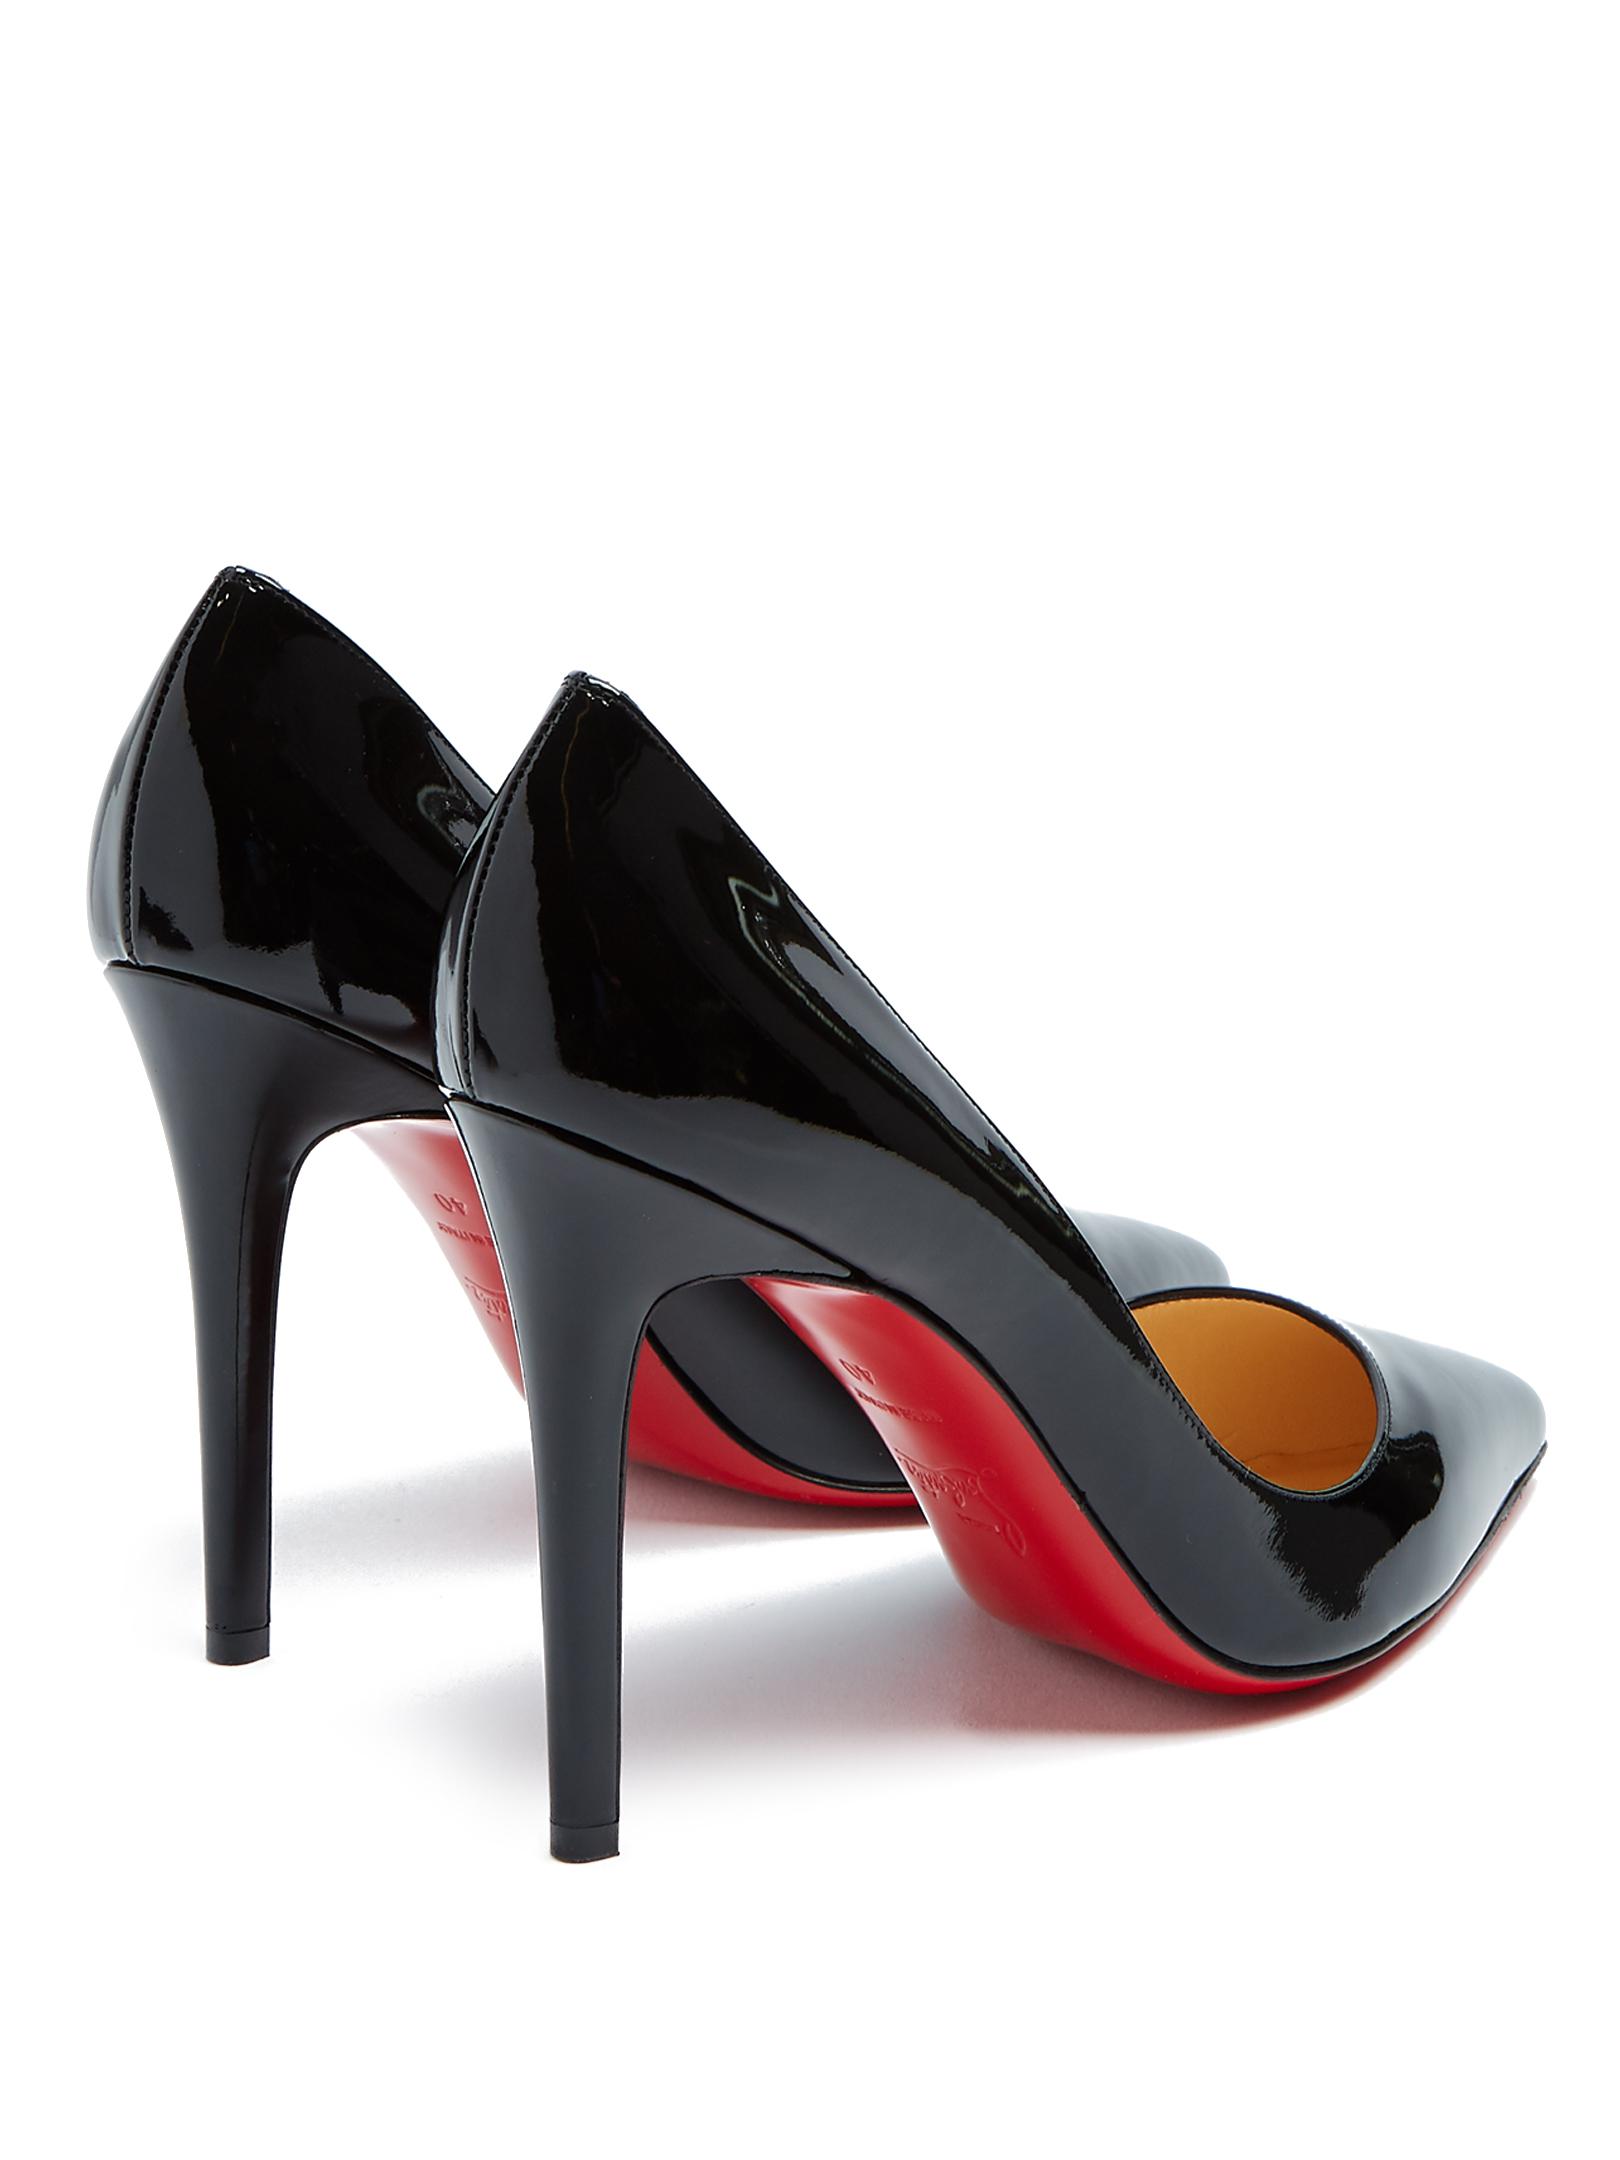 Christian Louboutin Pigalle 100mm Patent-leather Pumps in Black | Lyst